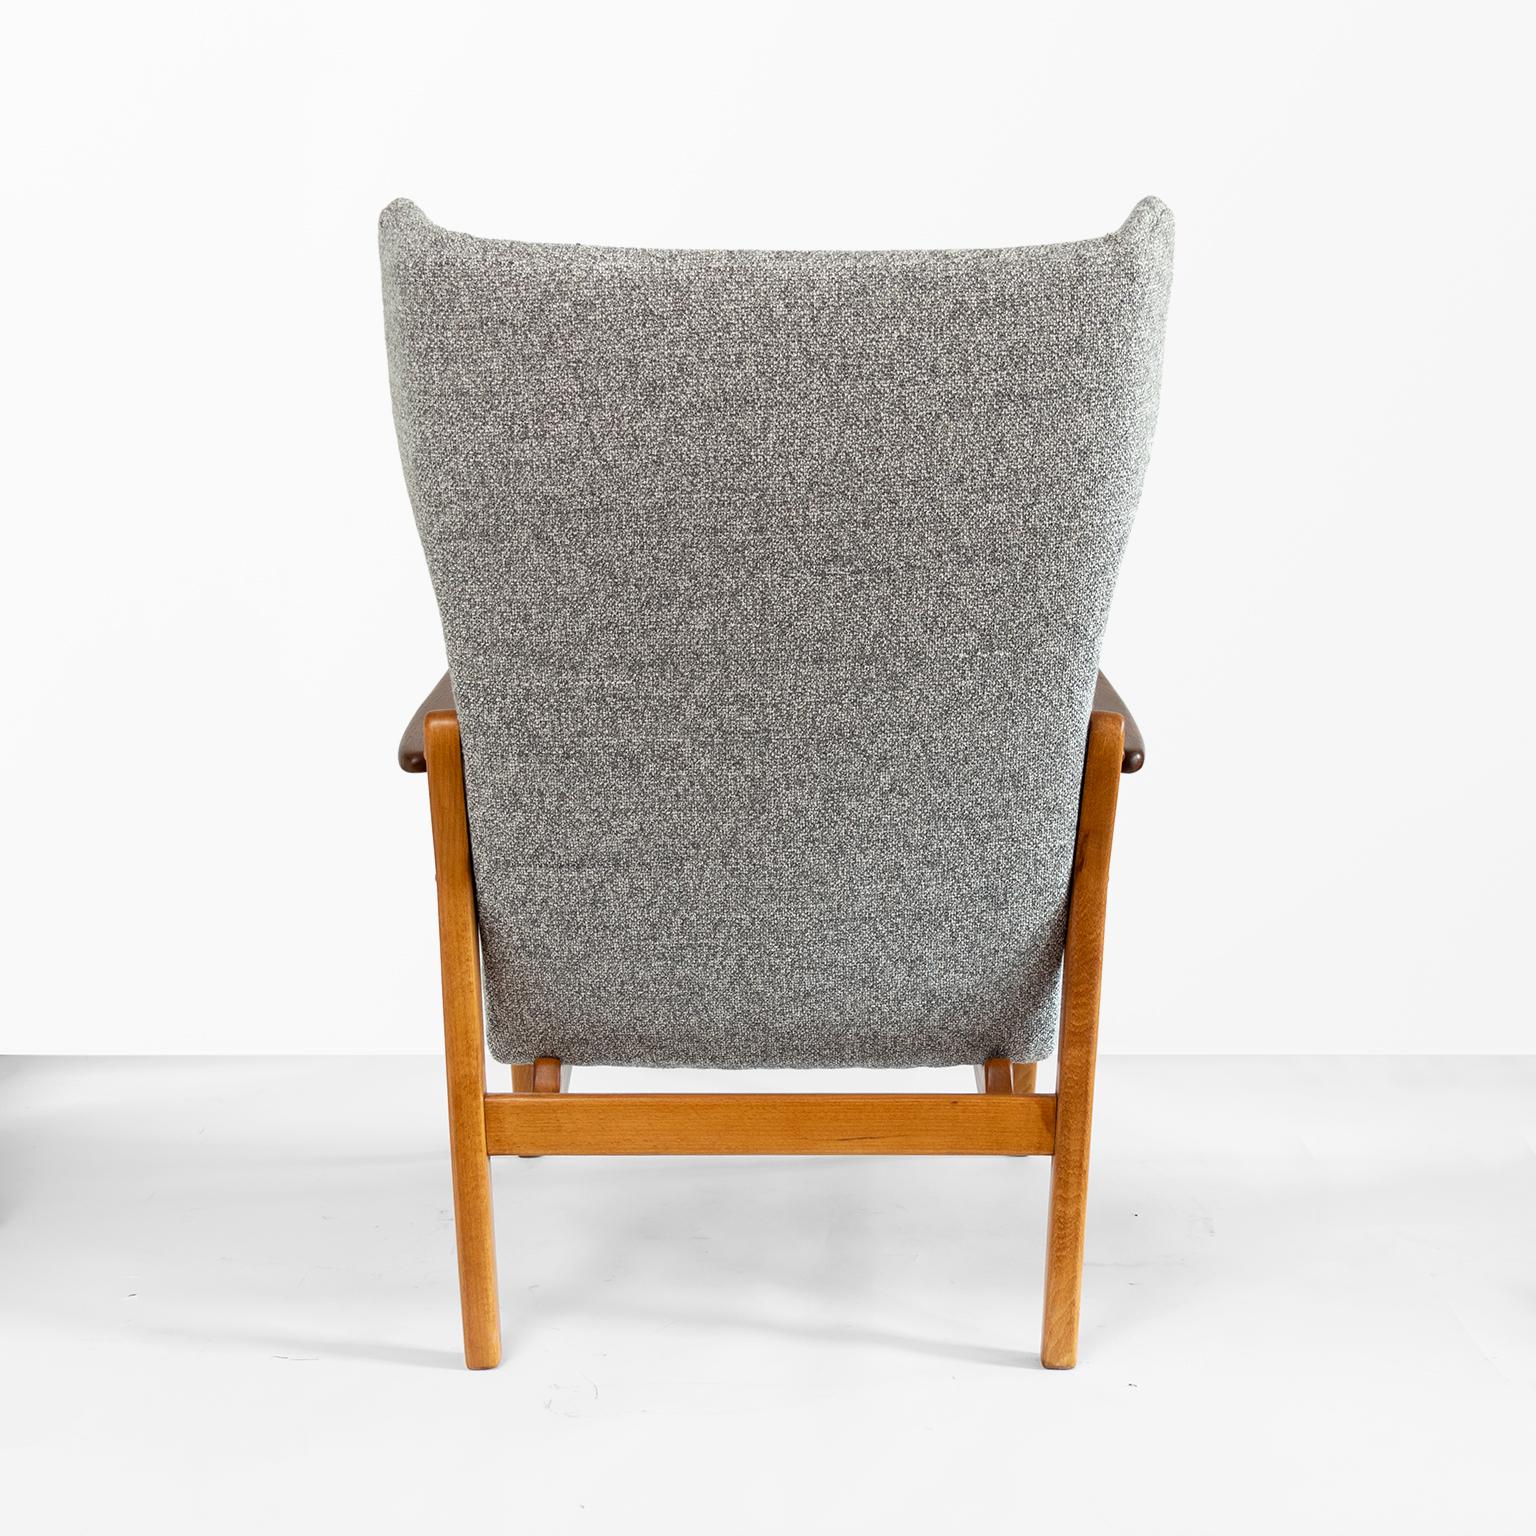 20th Century Scandinavian Modern Wingback Chair with a Solid Beech Wood Frame and Teak Arms